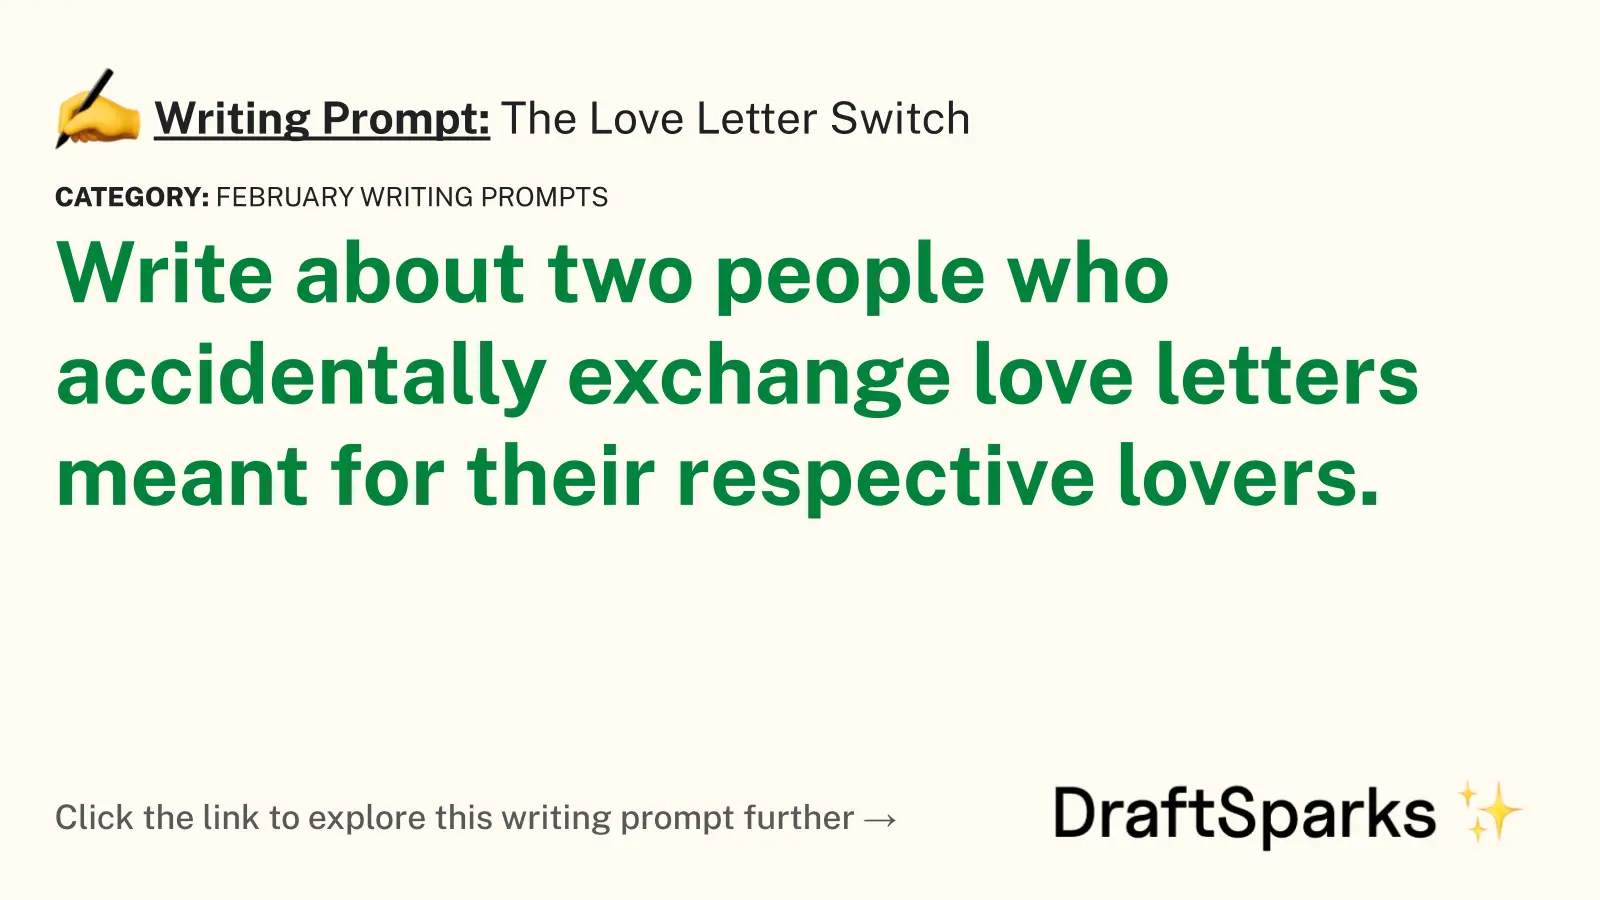 The Love Letter Switch